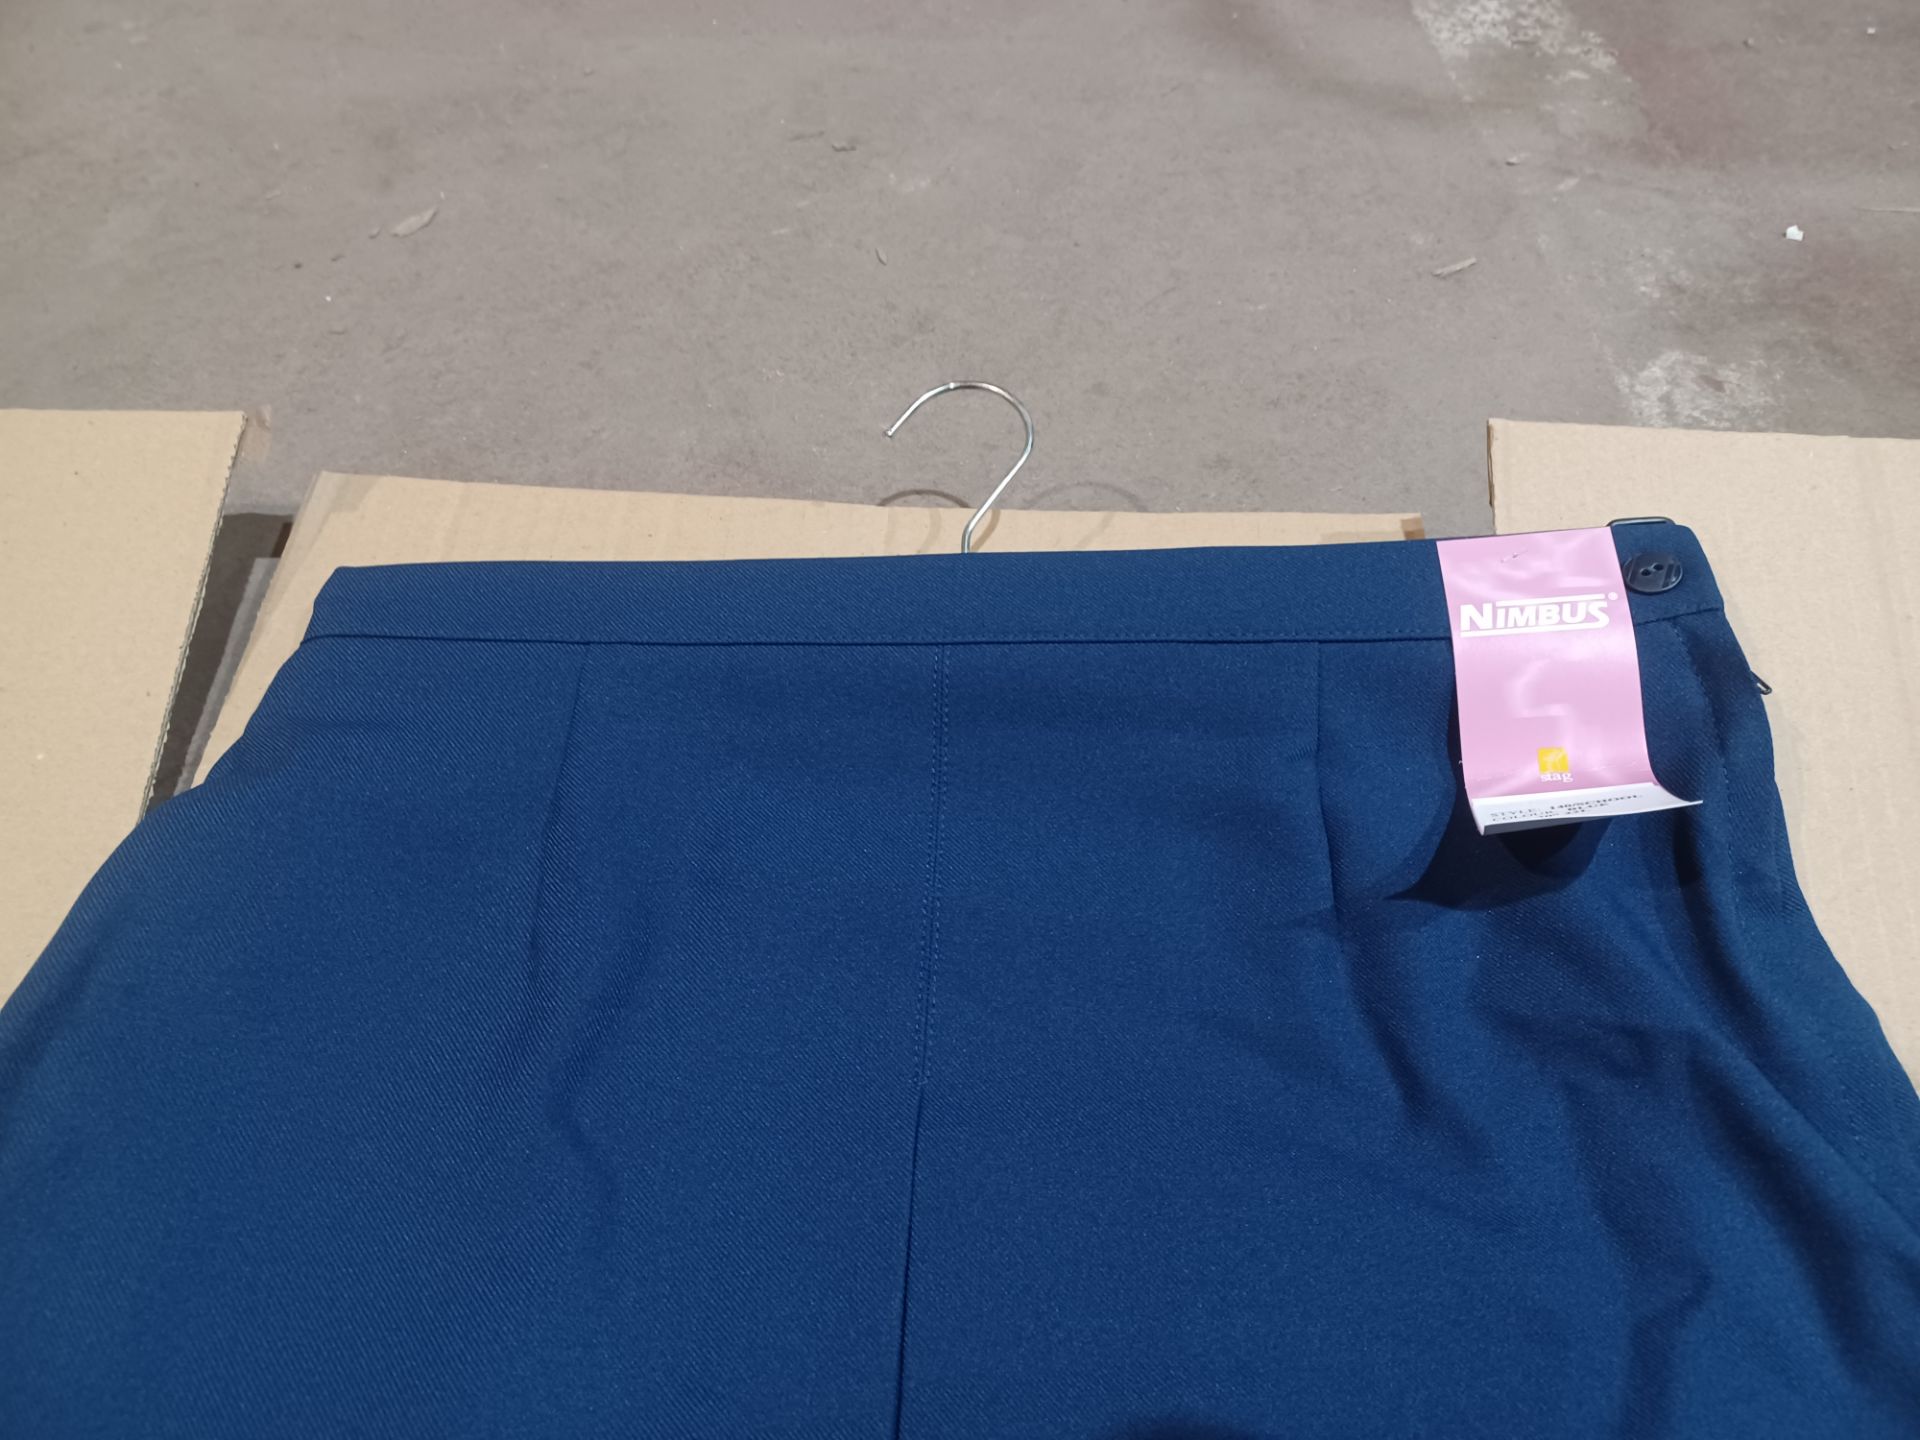 47 x Deluxe Nimbus Blue Skirts in Various Sizes. RRP £15.84 each. - R14 - Image 2 of 2